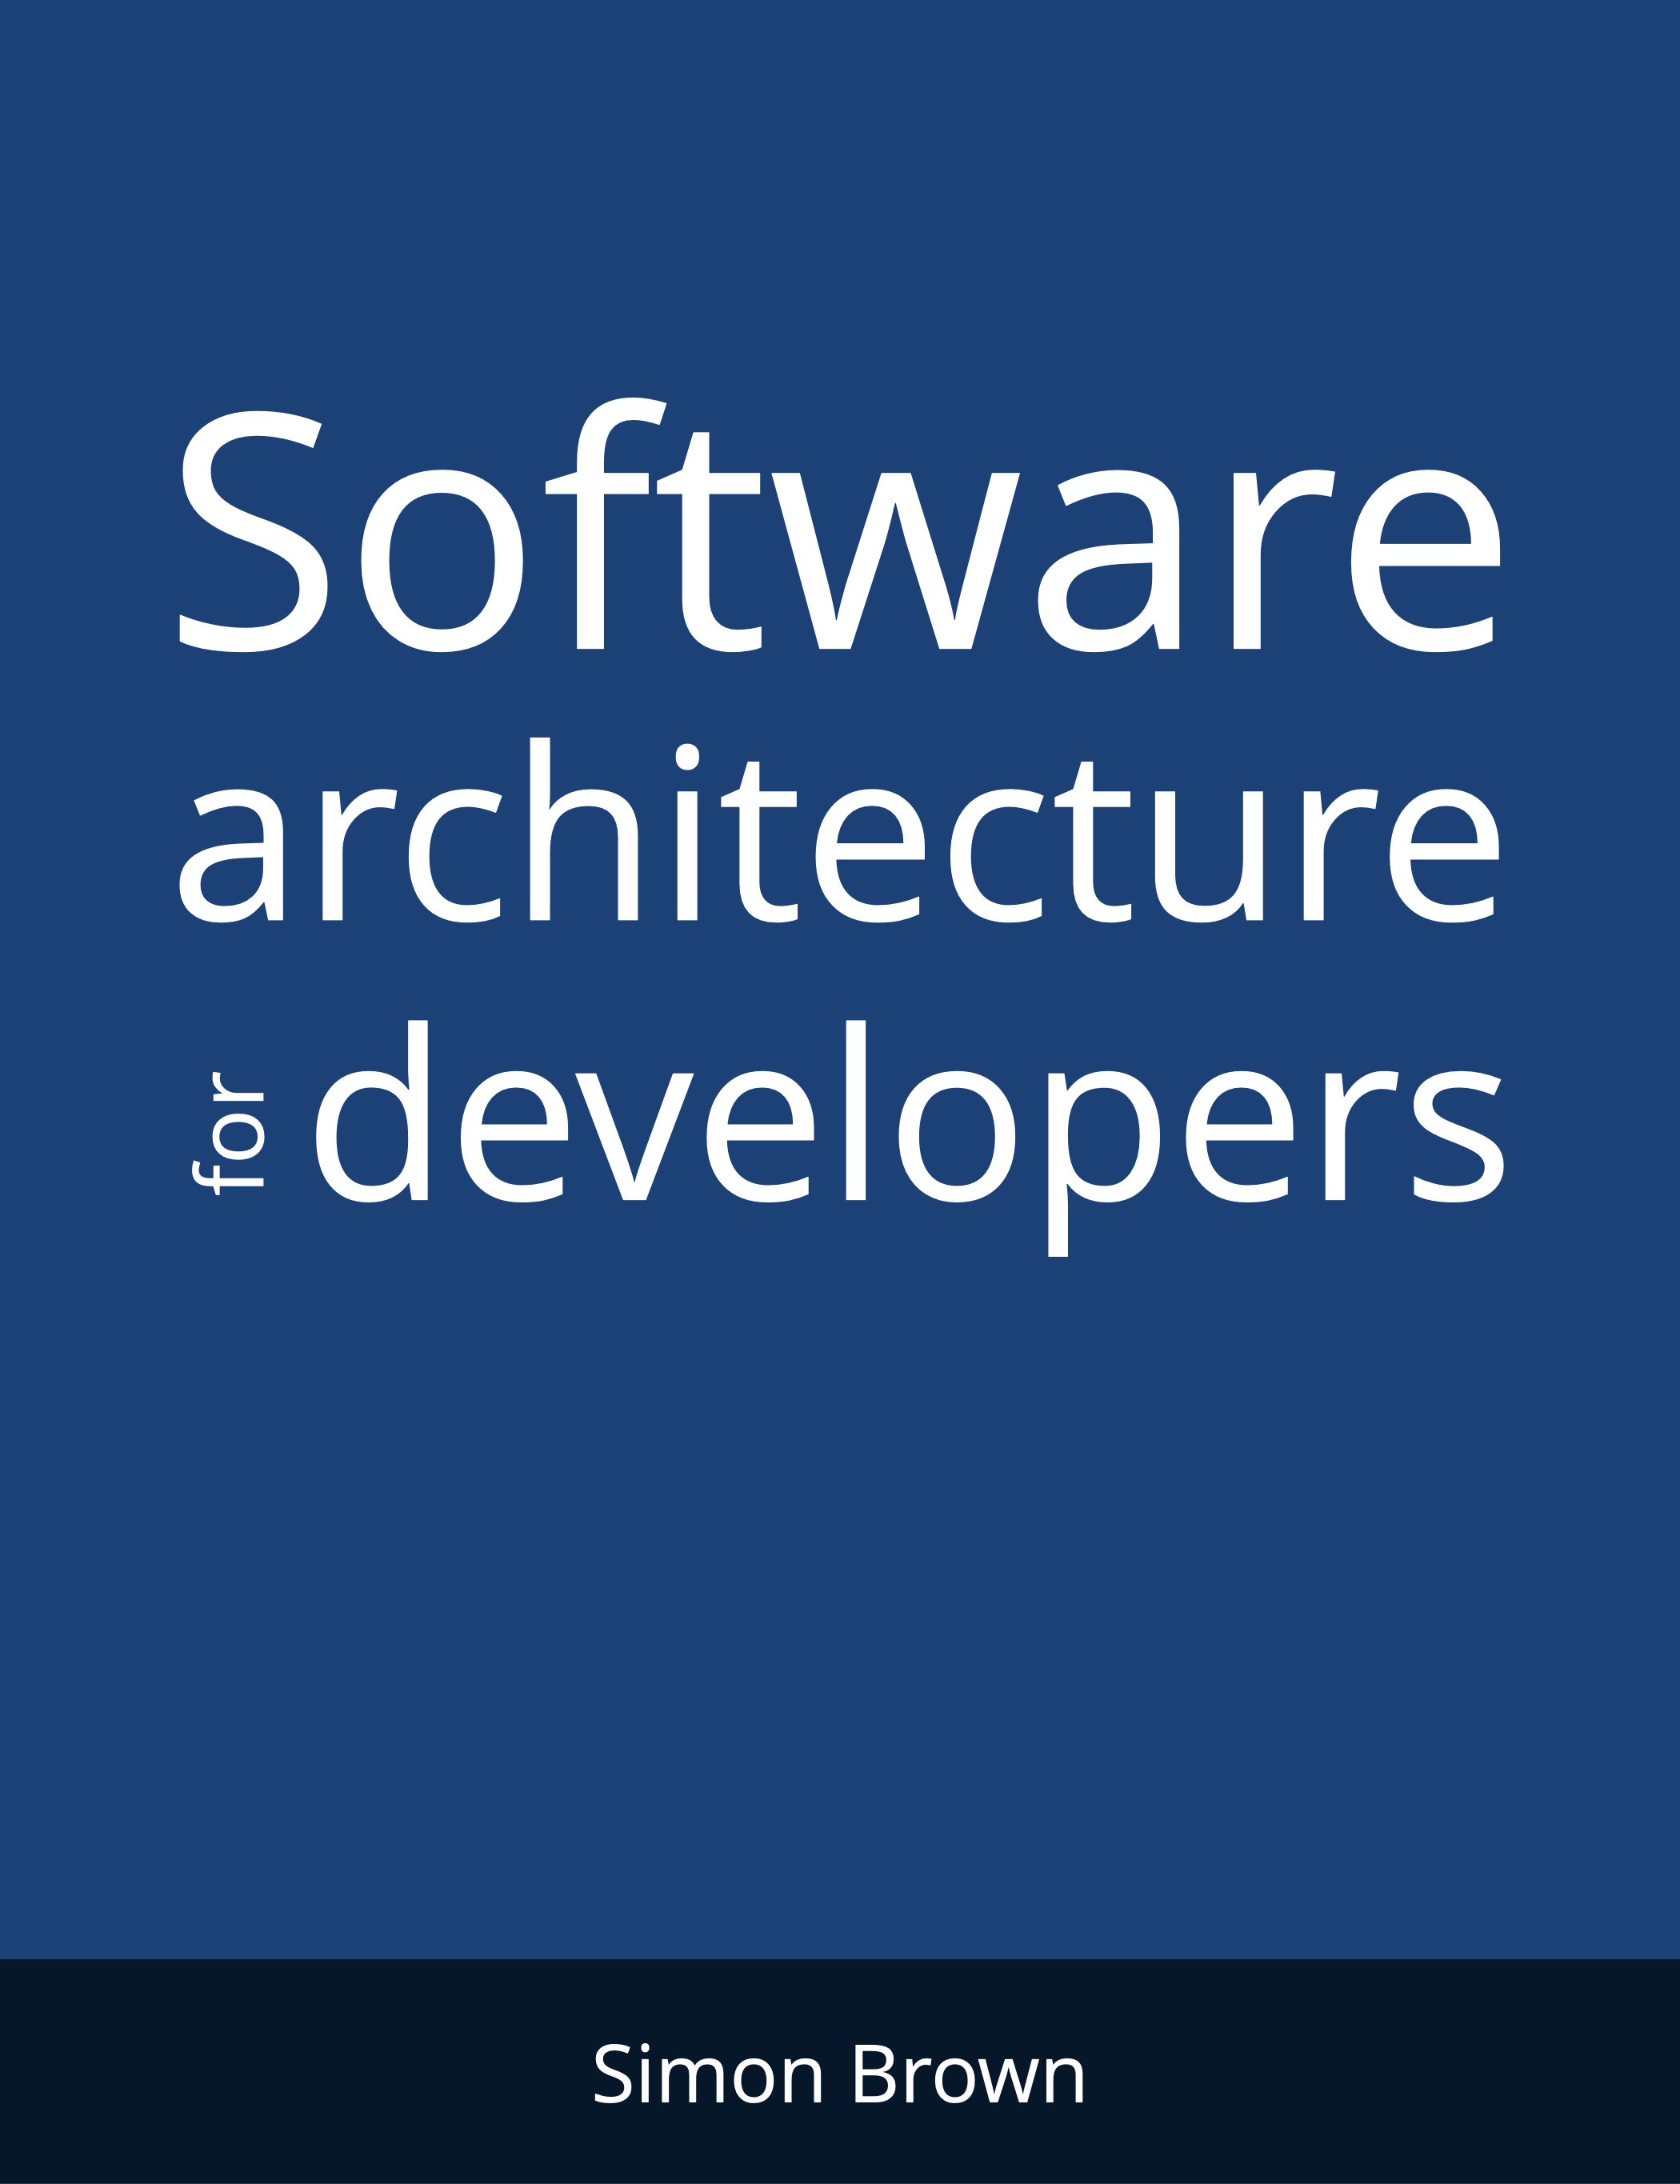 Software architecture for developers